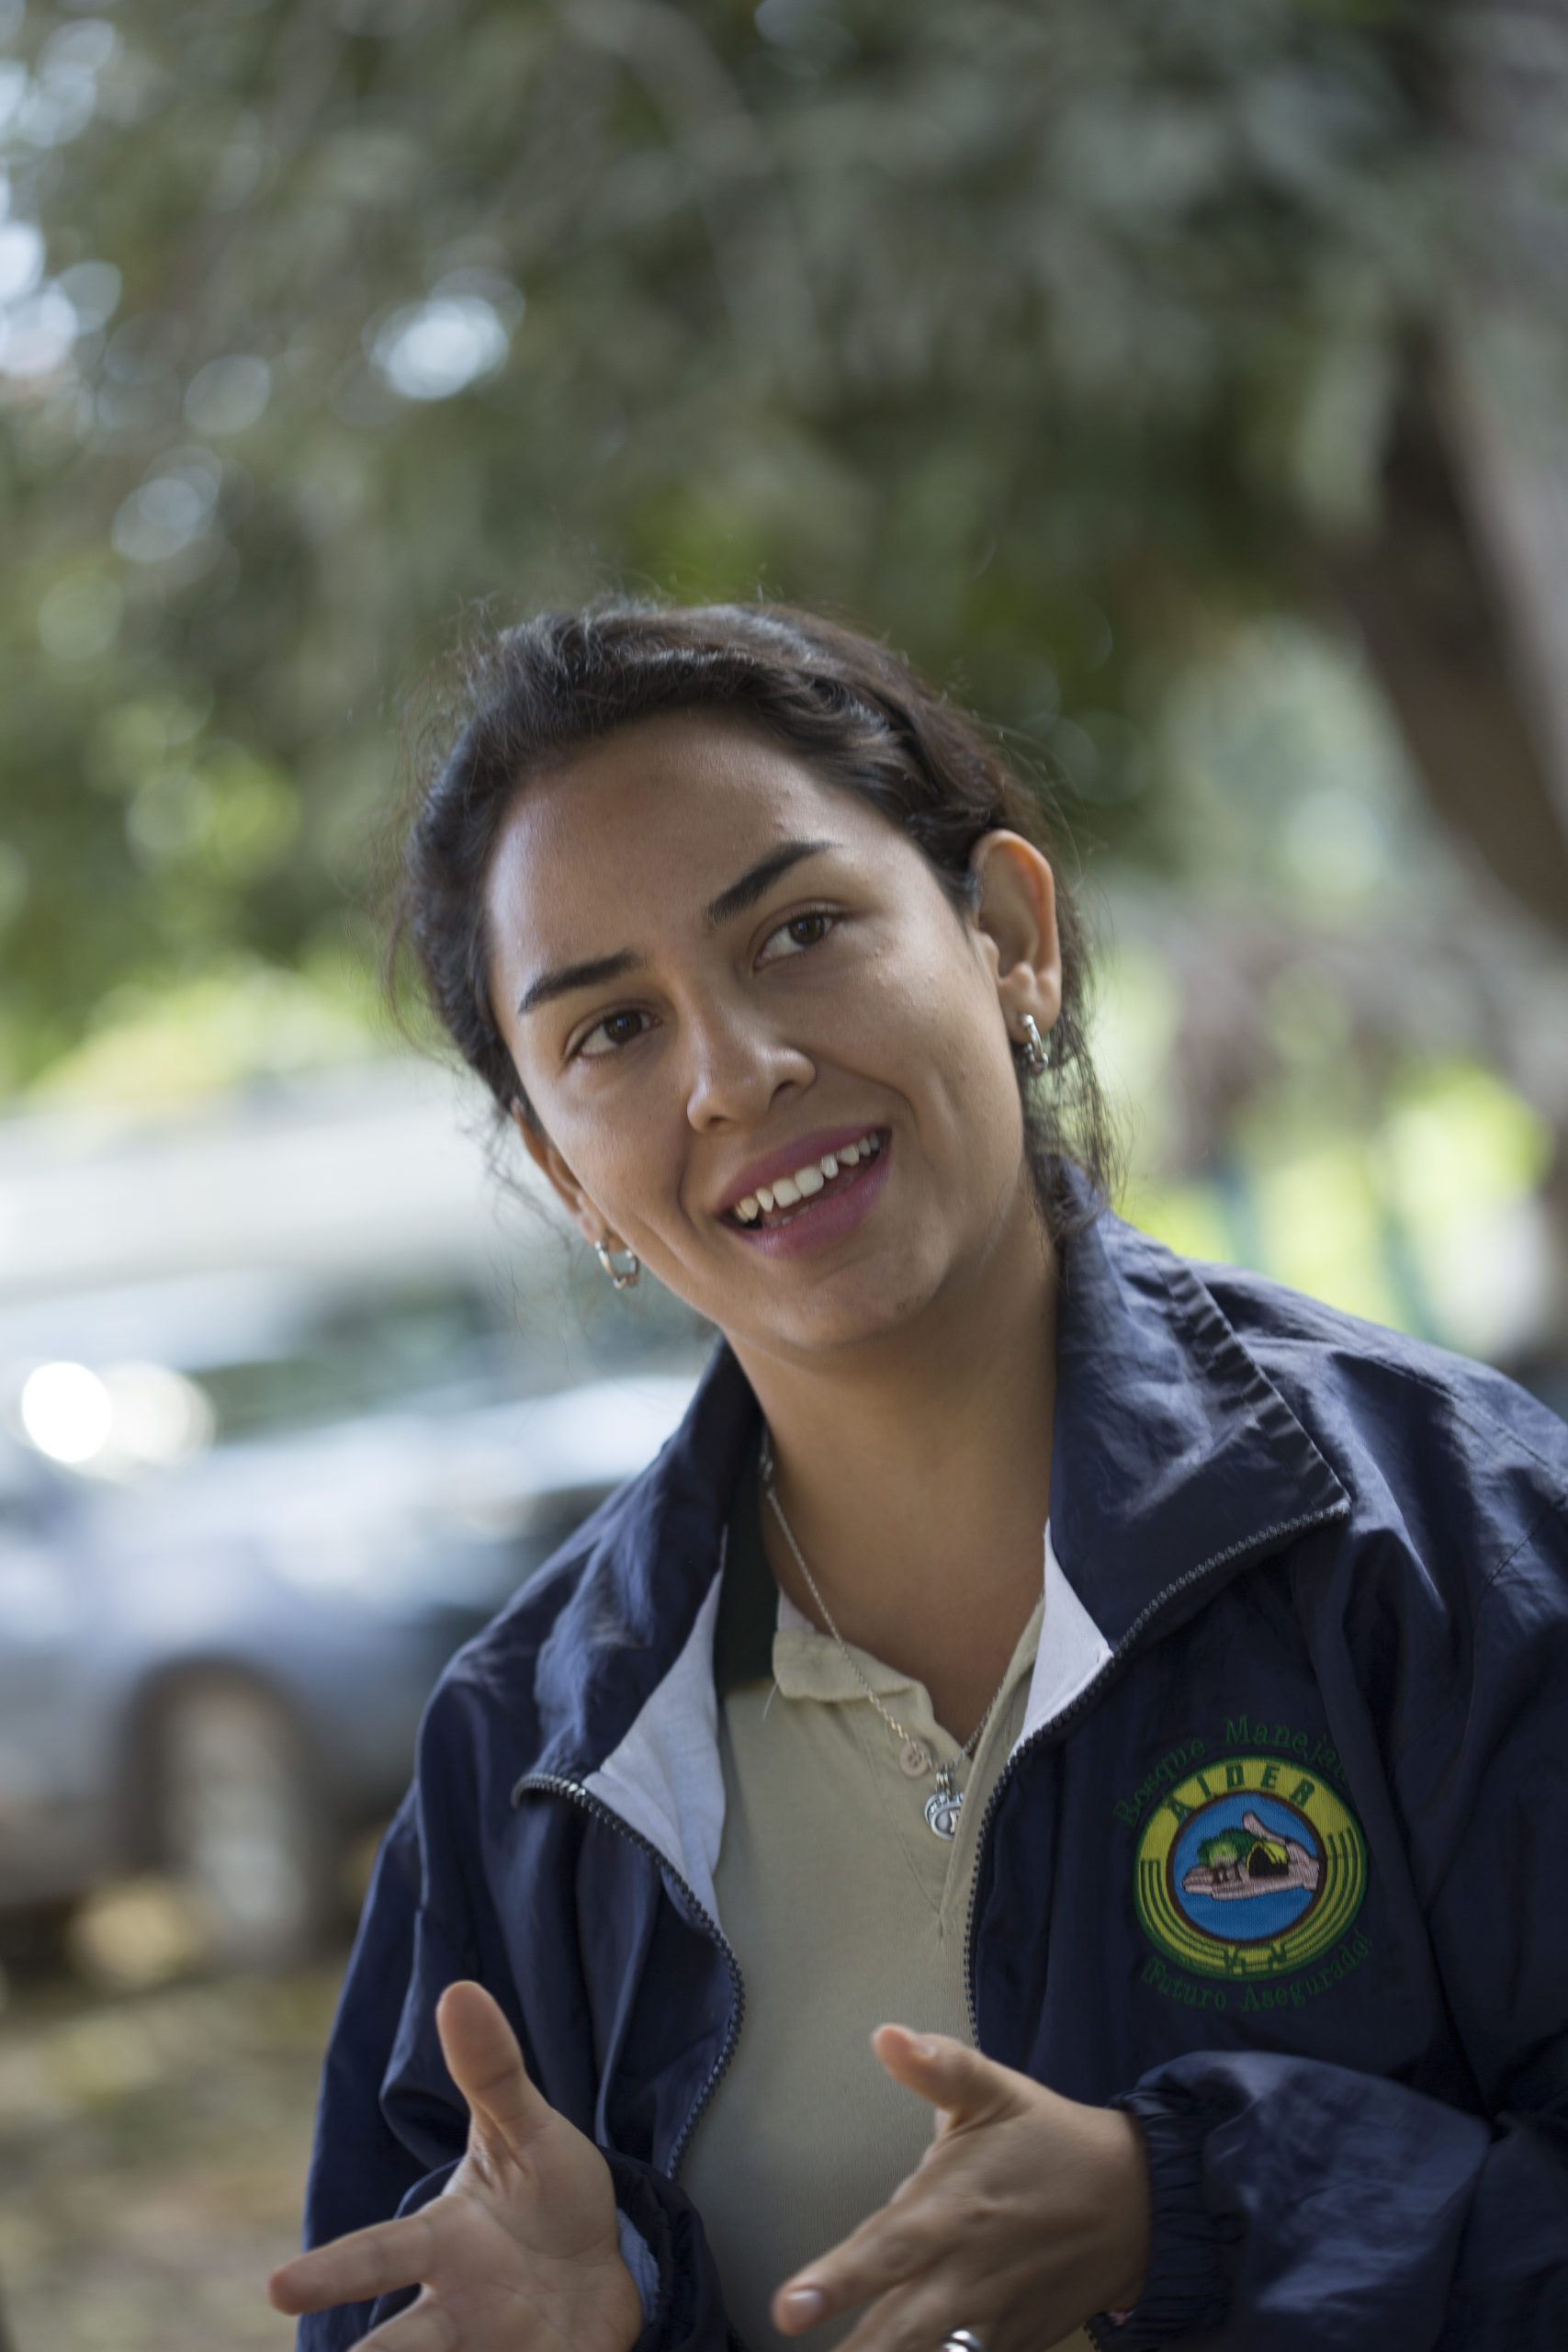 Forest hero: Paola, Agroforestry